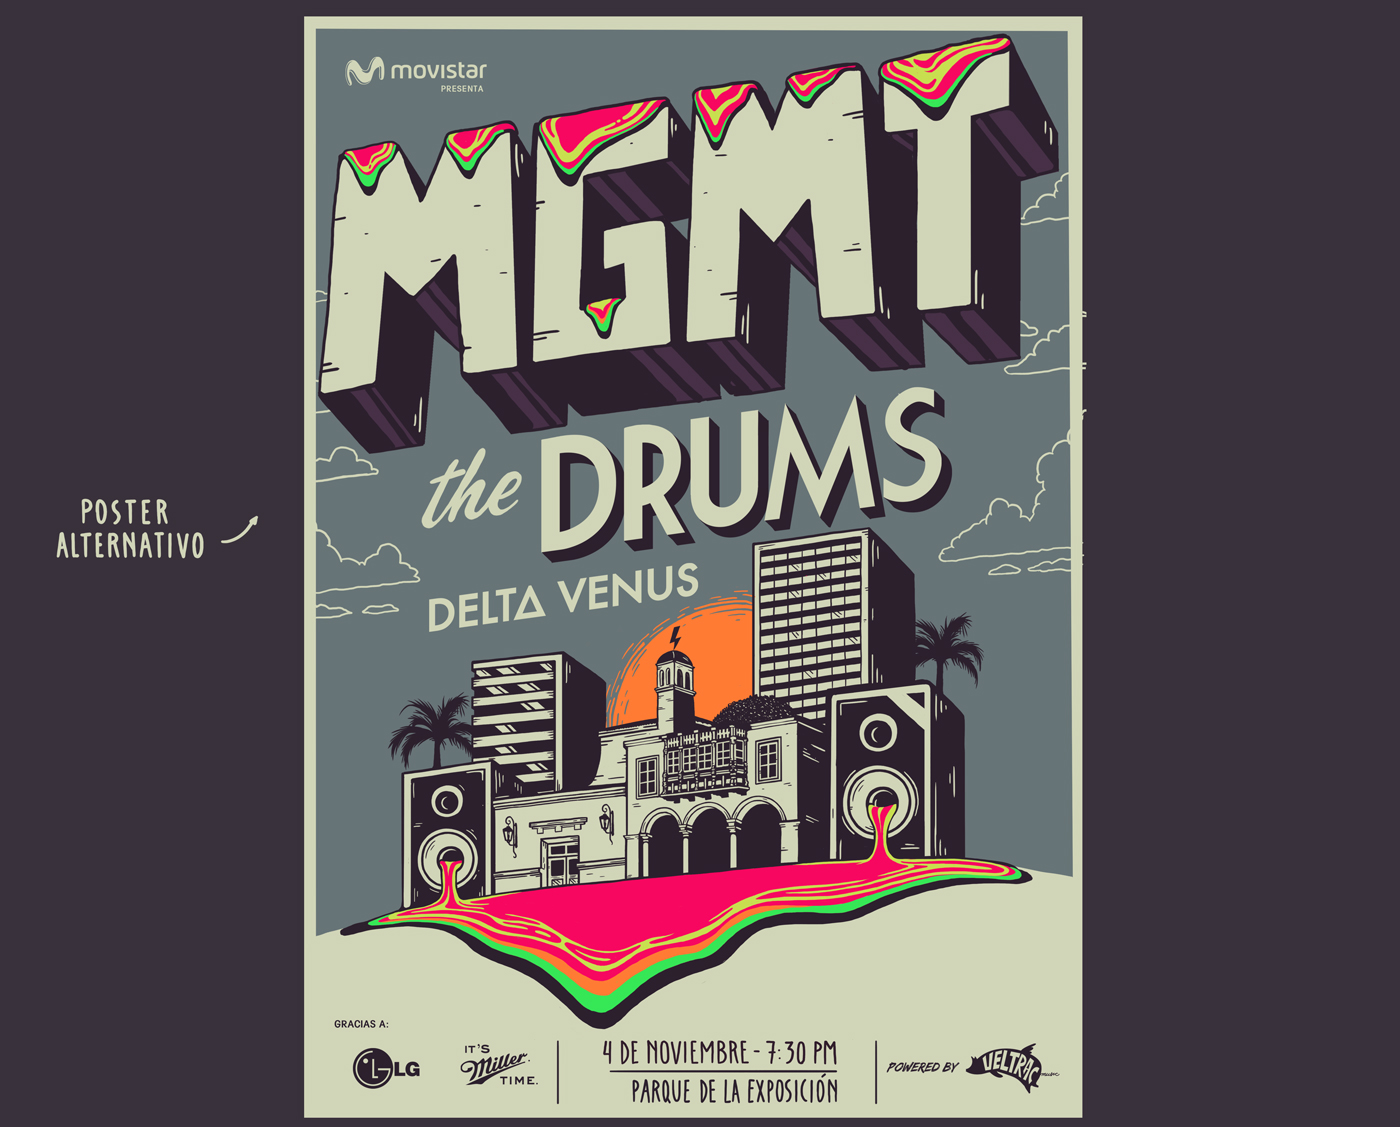 Veltrac poster gig poster mgmt The Drums afiche